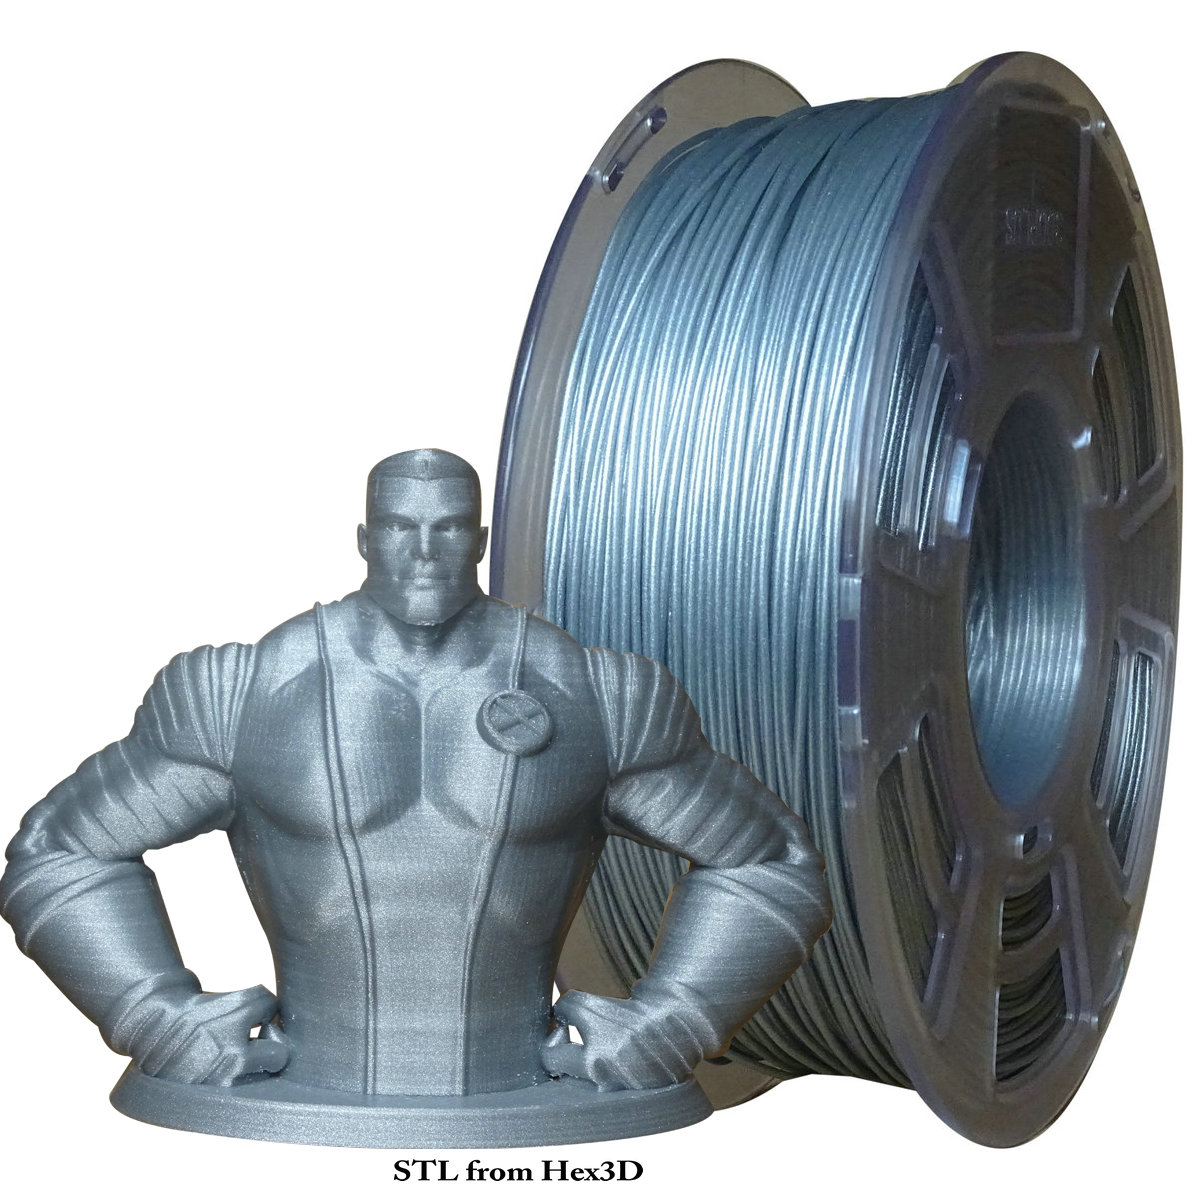 Worldwide available latest products Stronghero3D PLA 3D Printer filament  1.75mm Net weight 1kg accuracy +/-0.05mm